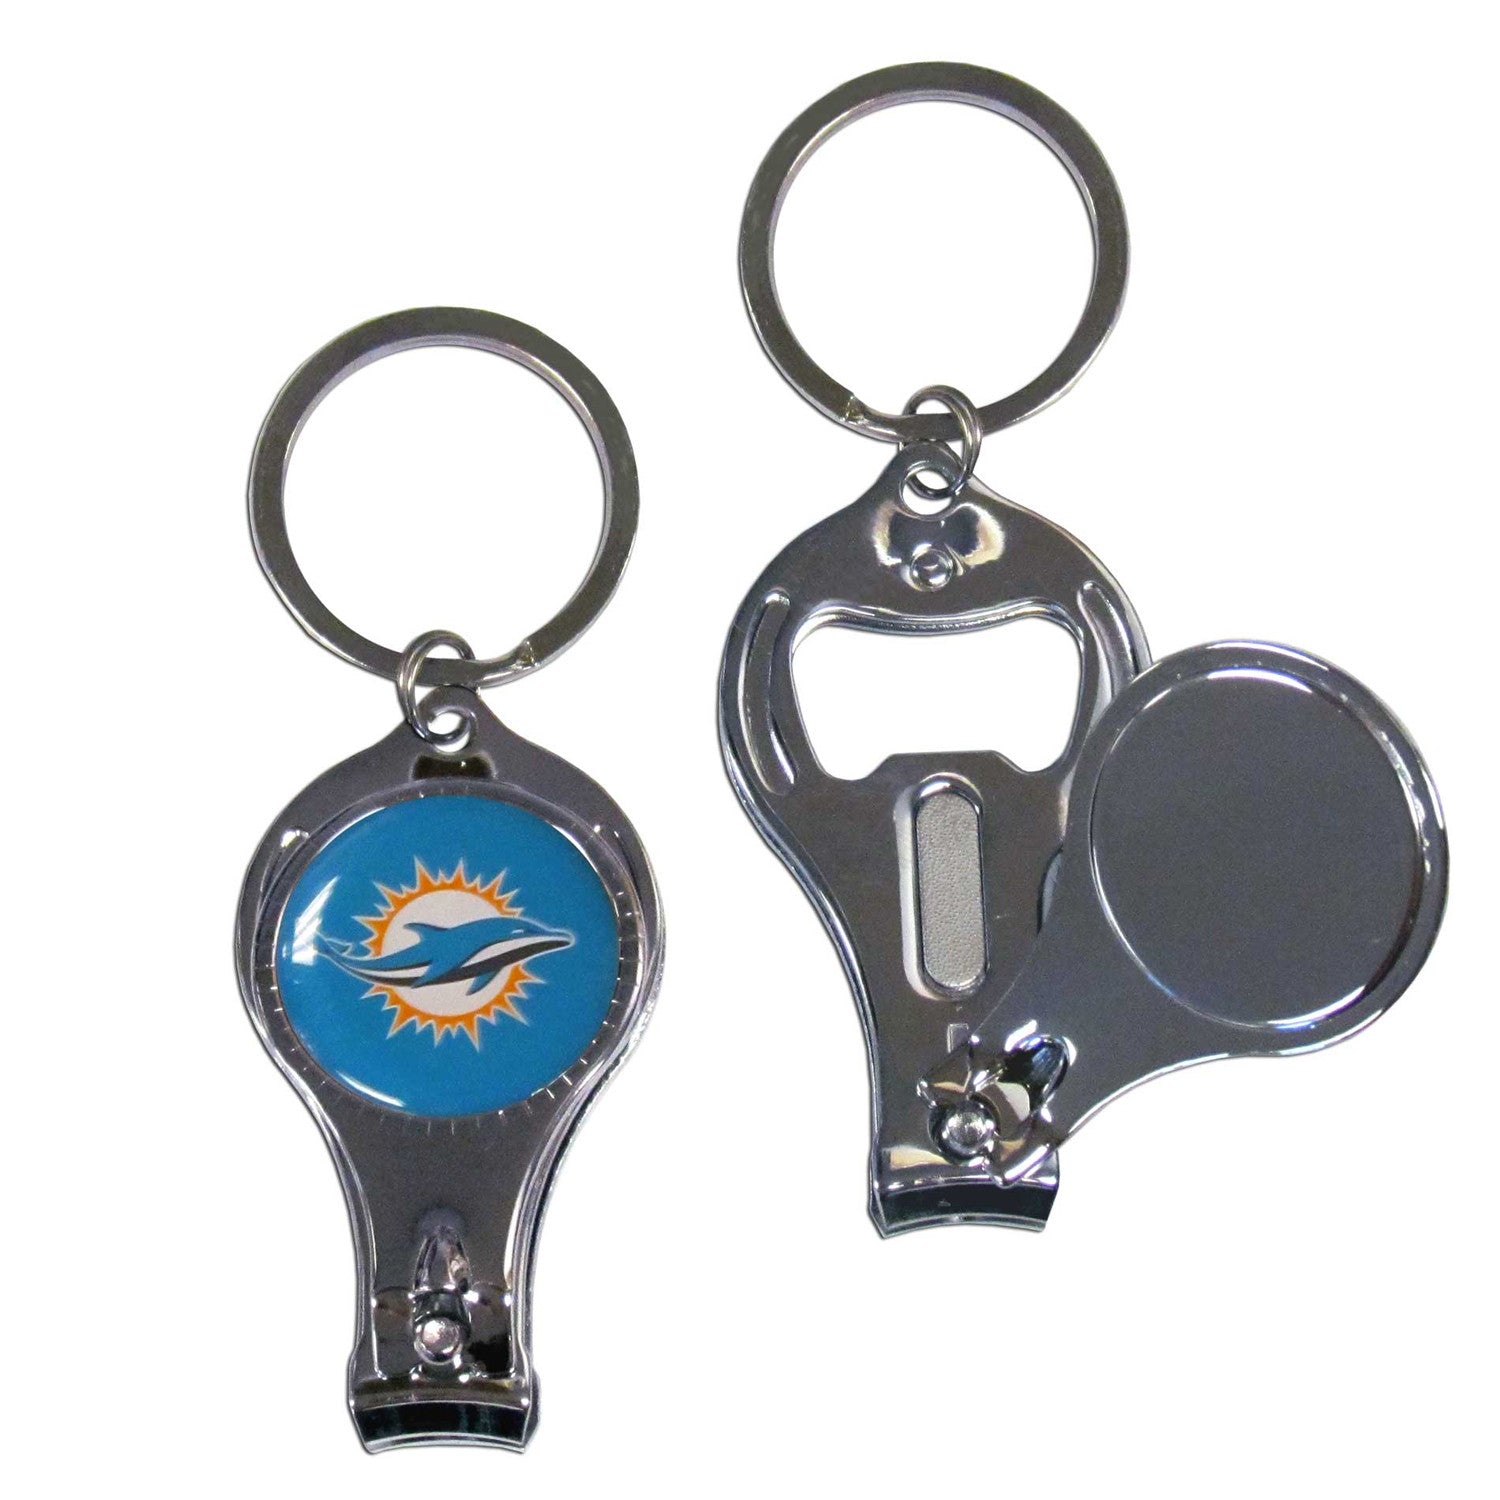 Miami Dolphins 3 in1 key chain - CanesWear at Miami FanWear general St Louis Wholesale CanesWear at Miami FanWear